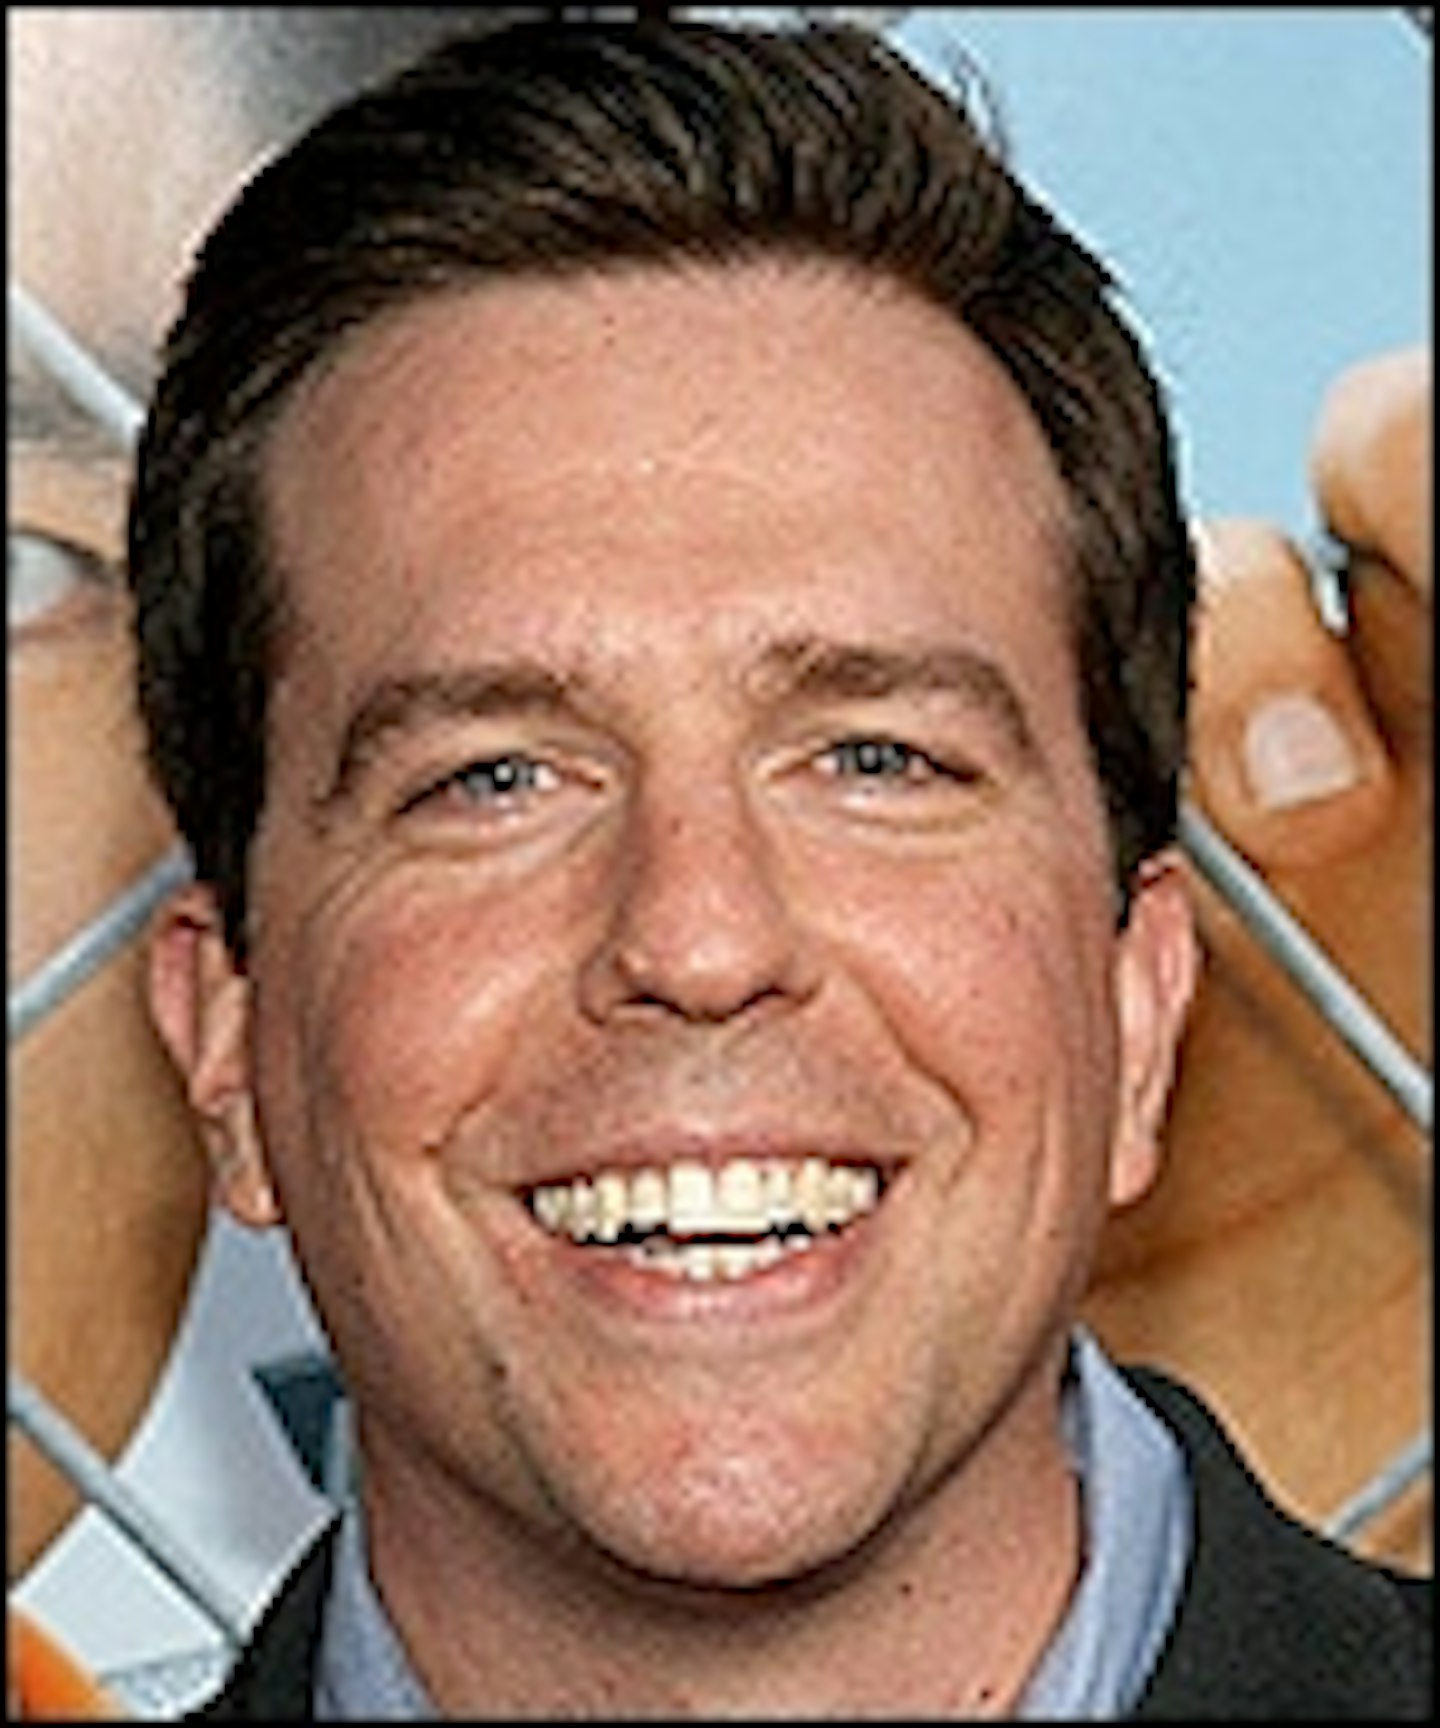 Ed Helms On For They Came Together